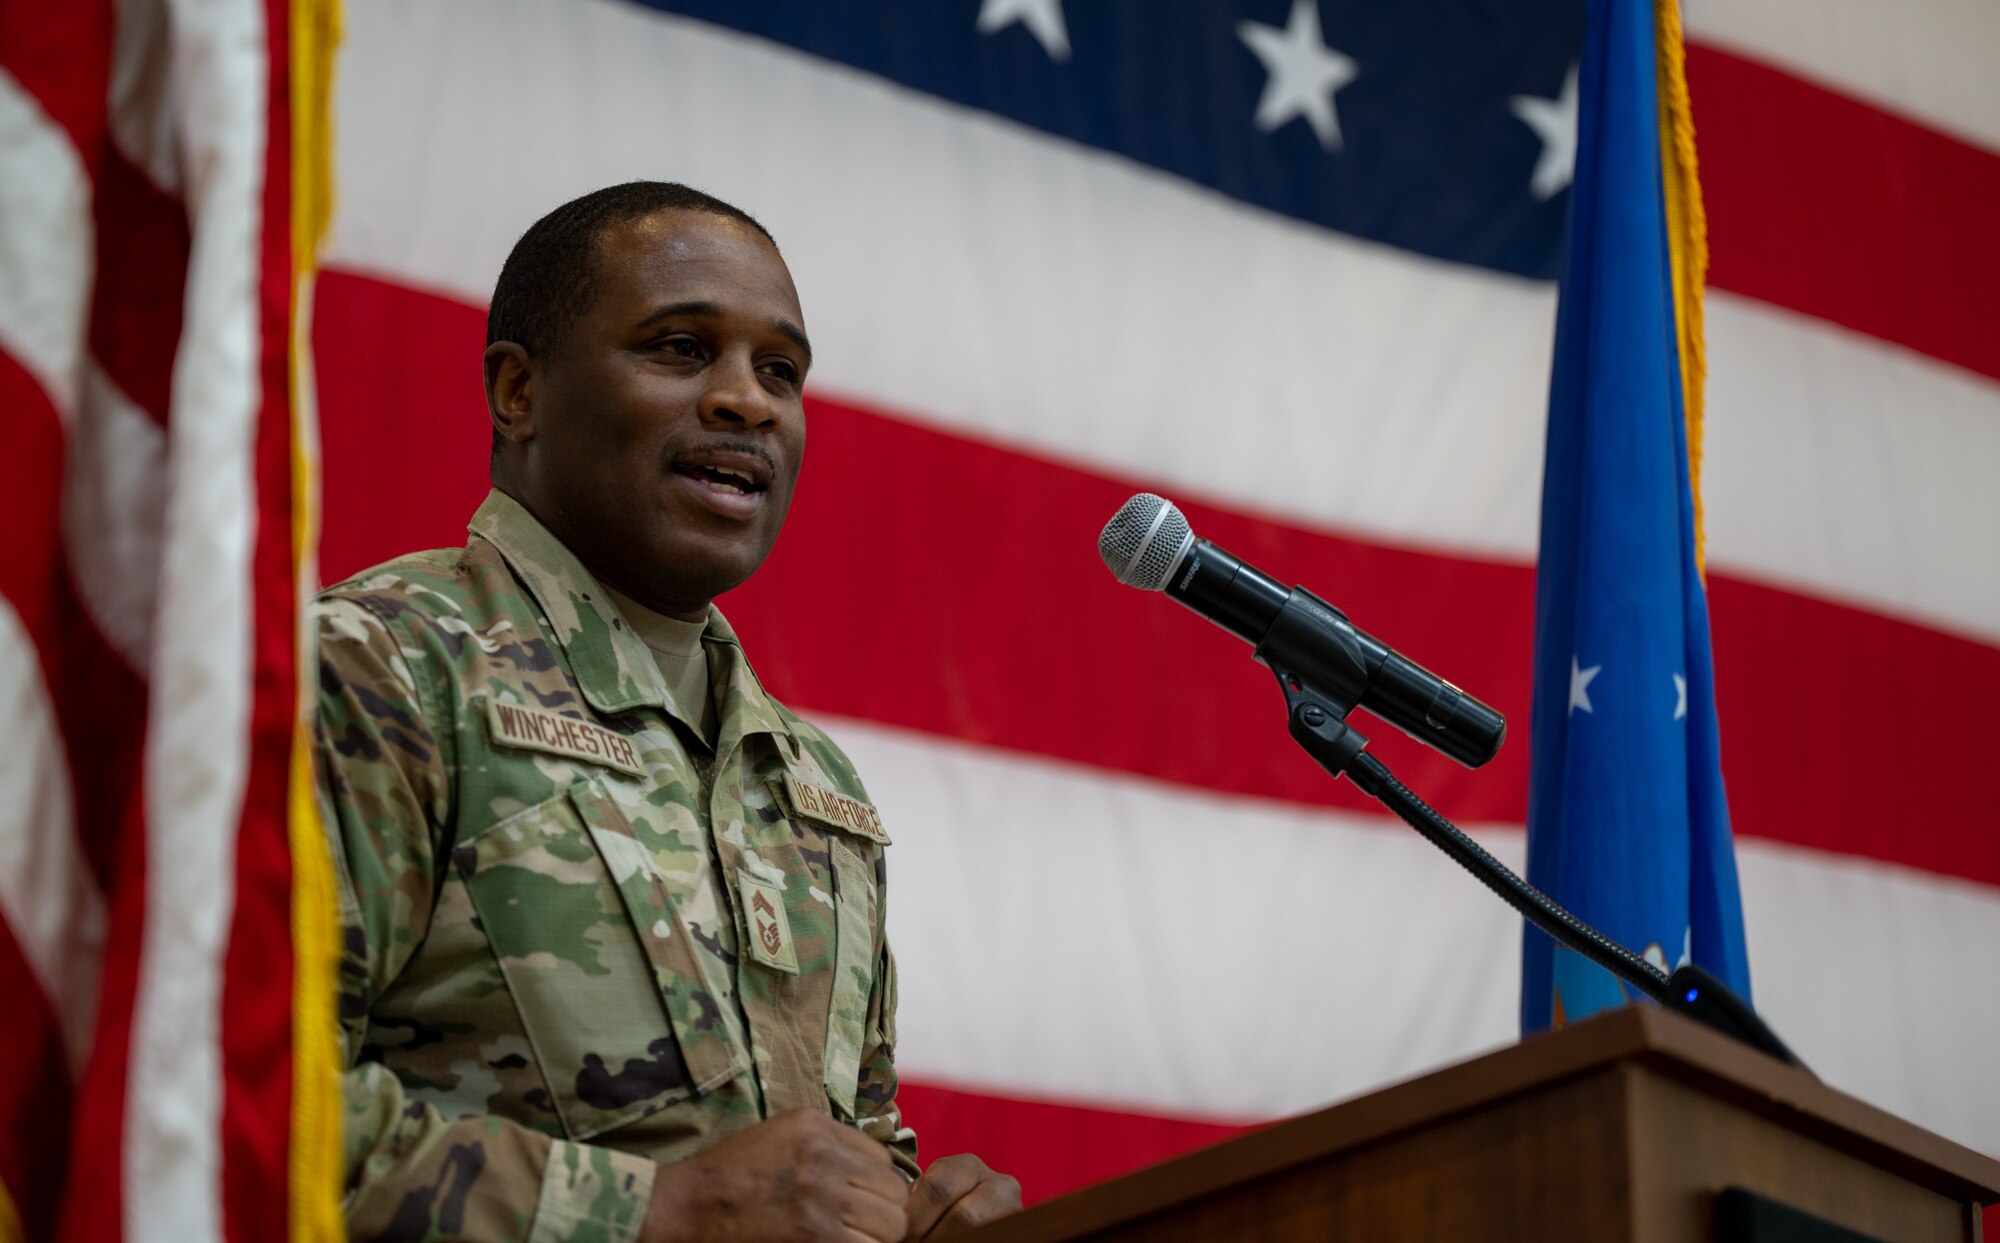 U.S. Air Force Chief Master Sgt. Donald Winchester, 56th Civil Engineering Squadron senior enlisted leader, speaks about the history and importance of Juneteenth during a luncheon event, June 16, 2022, at Luke Air Force Base, Arizona.